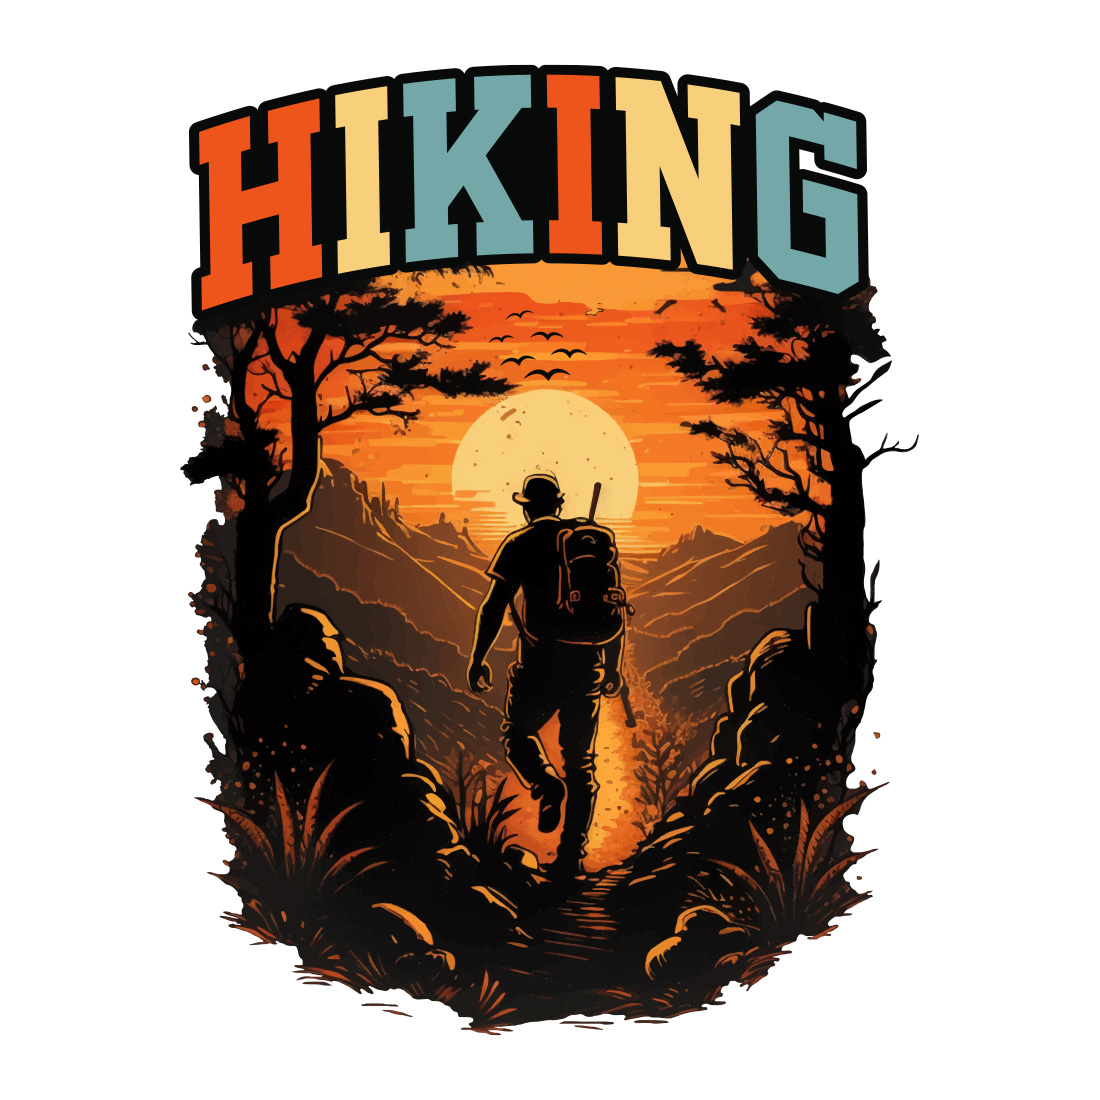 Hiking T-shirt Design, Best Hiking t shirt, Hiking mountain forest retro vintage t shirt design, Adventure, travel, hiking preview image.